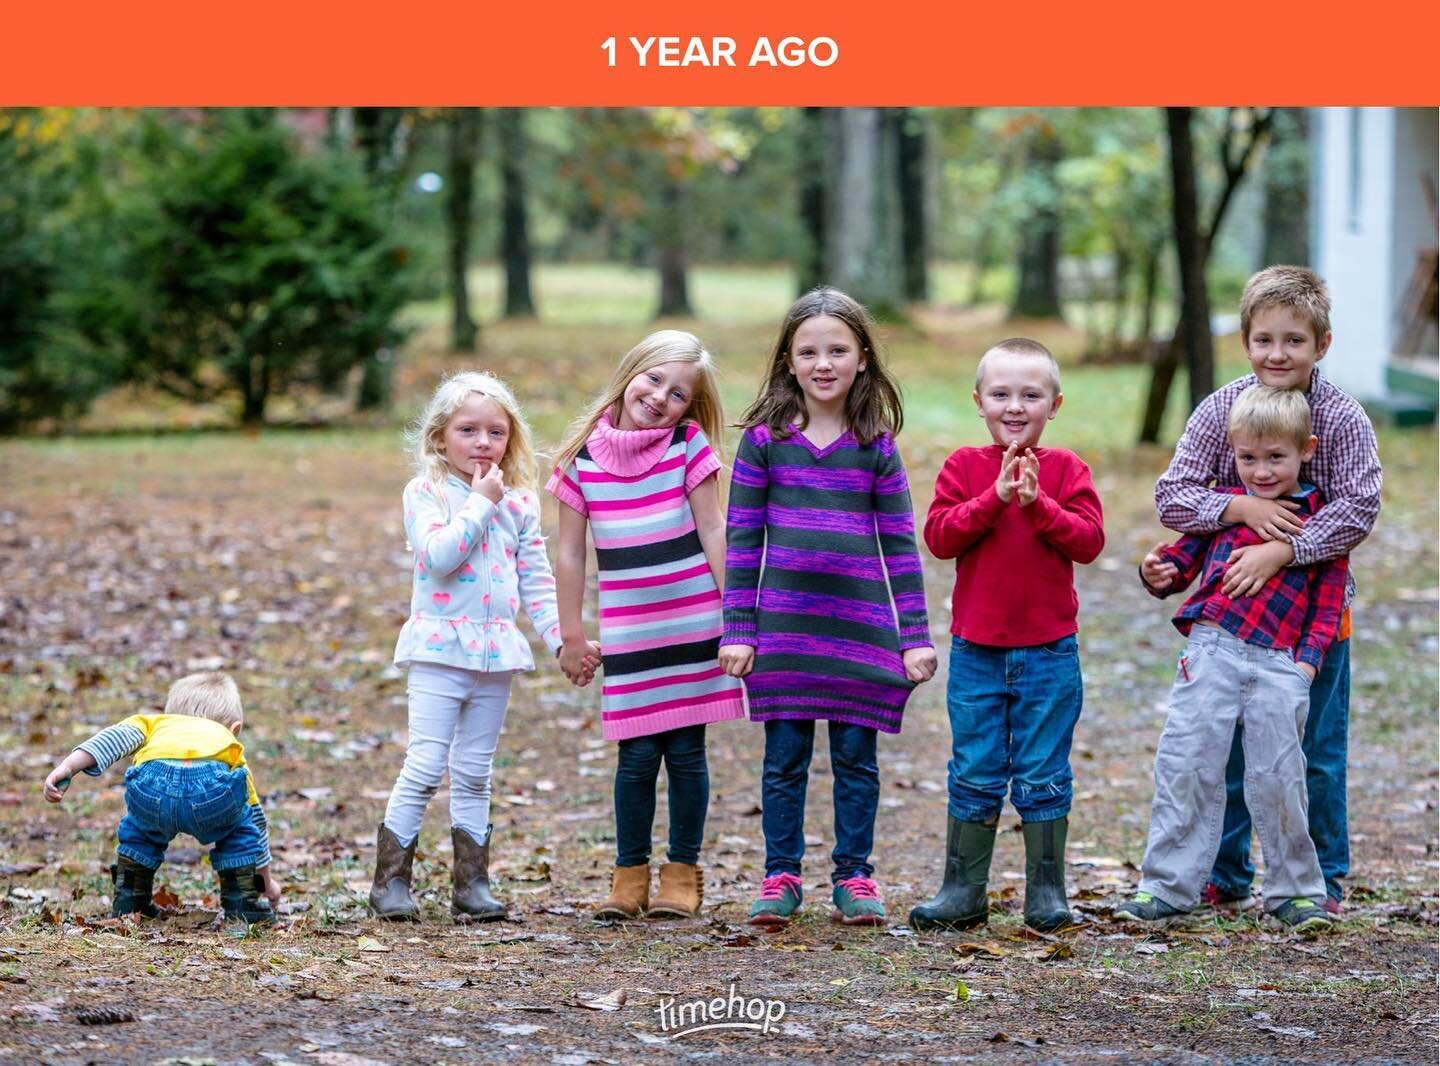 The kids of Camp Bearwallow have put in their hours in the last year! I can&rsquo;t wait to update this photo, one year later . . . #cousins #campbearwallow #hostingasafamily #thehostkids